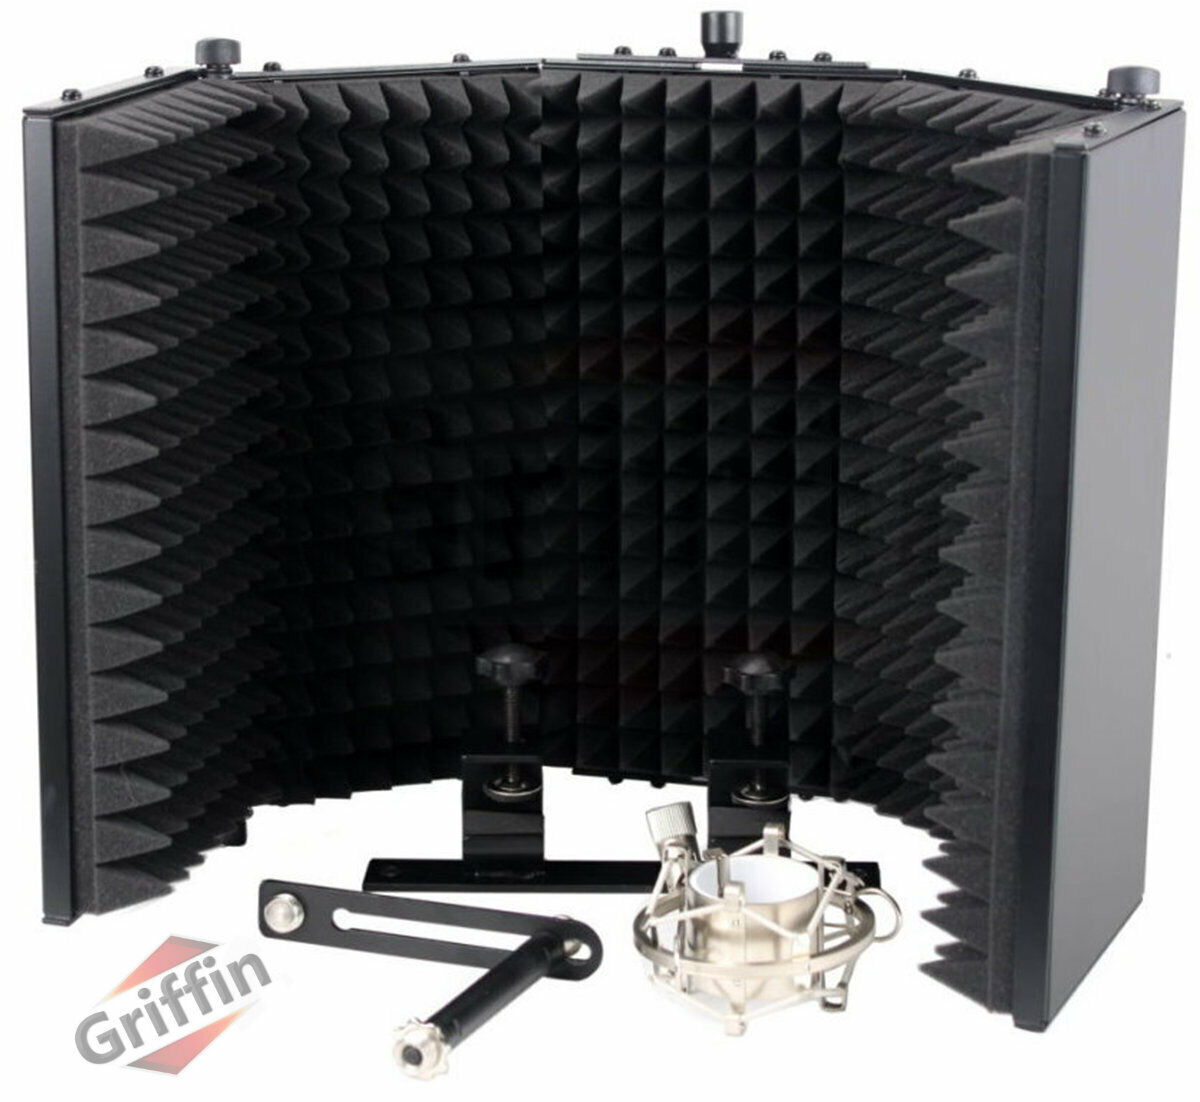 Studio Microphone Diffuser Isolation Sound Absorber Foam Panel Shield Mic Stand